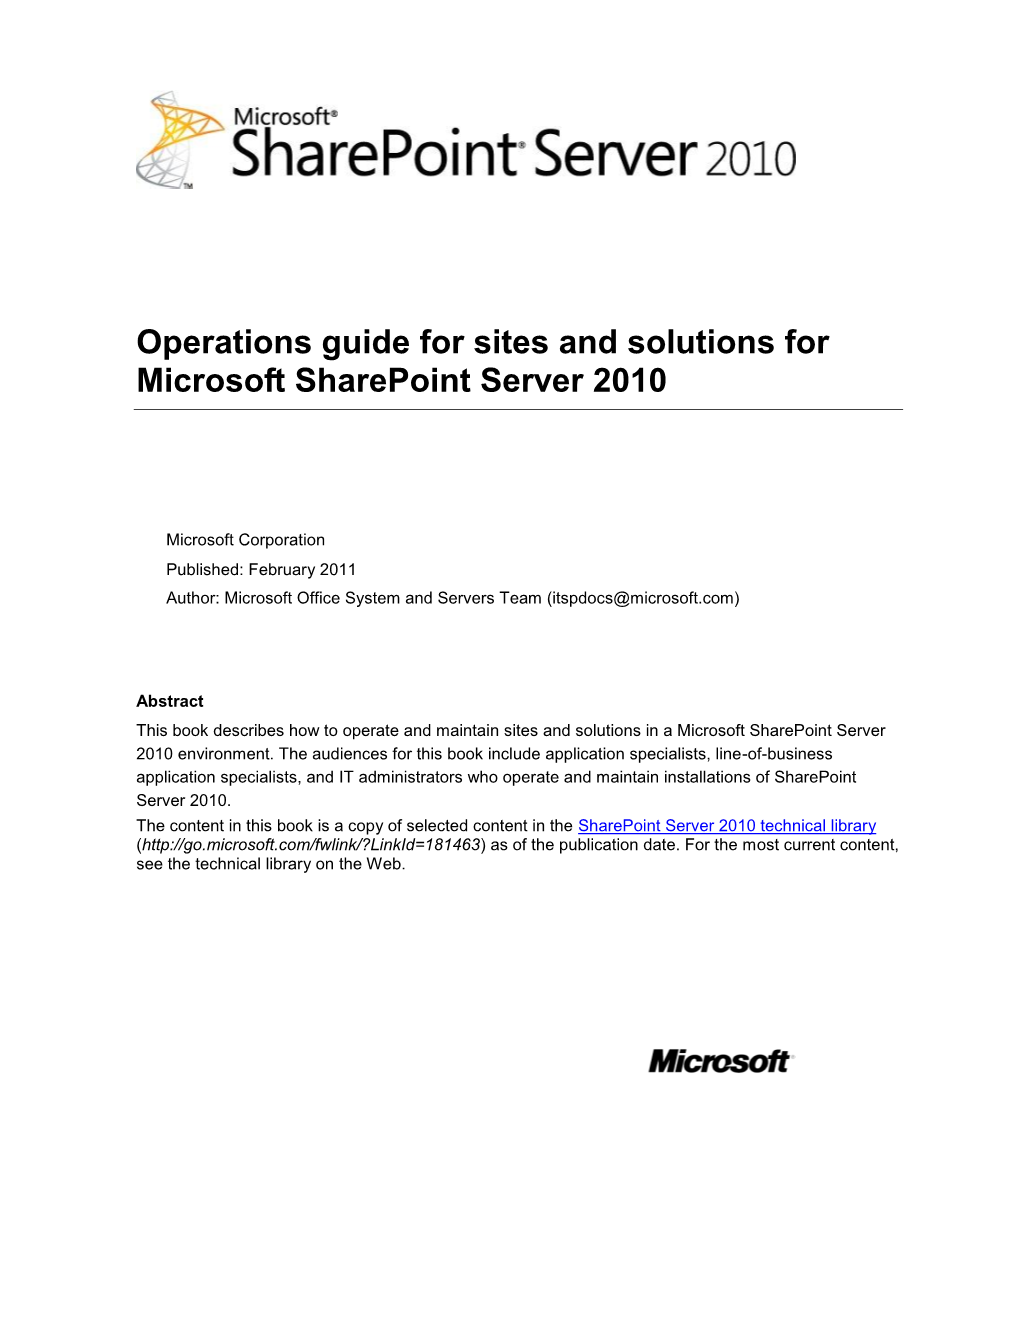 Operations Guide for Sites and Solutions for Microsoft Sharepoint Server 2010